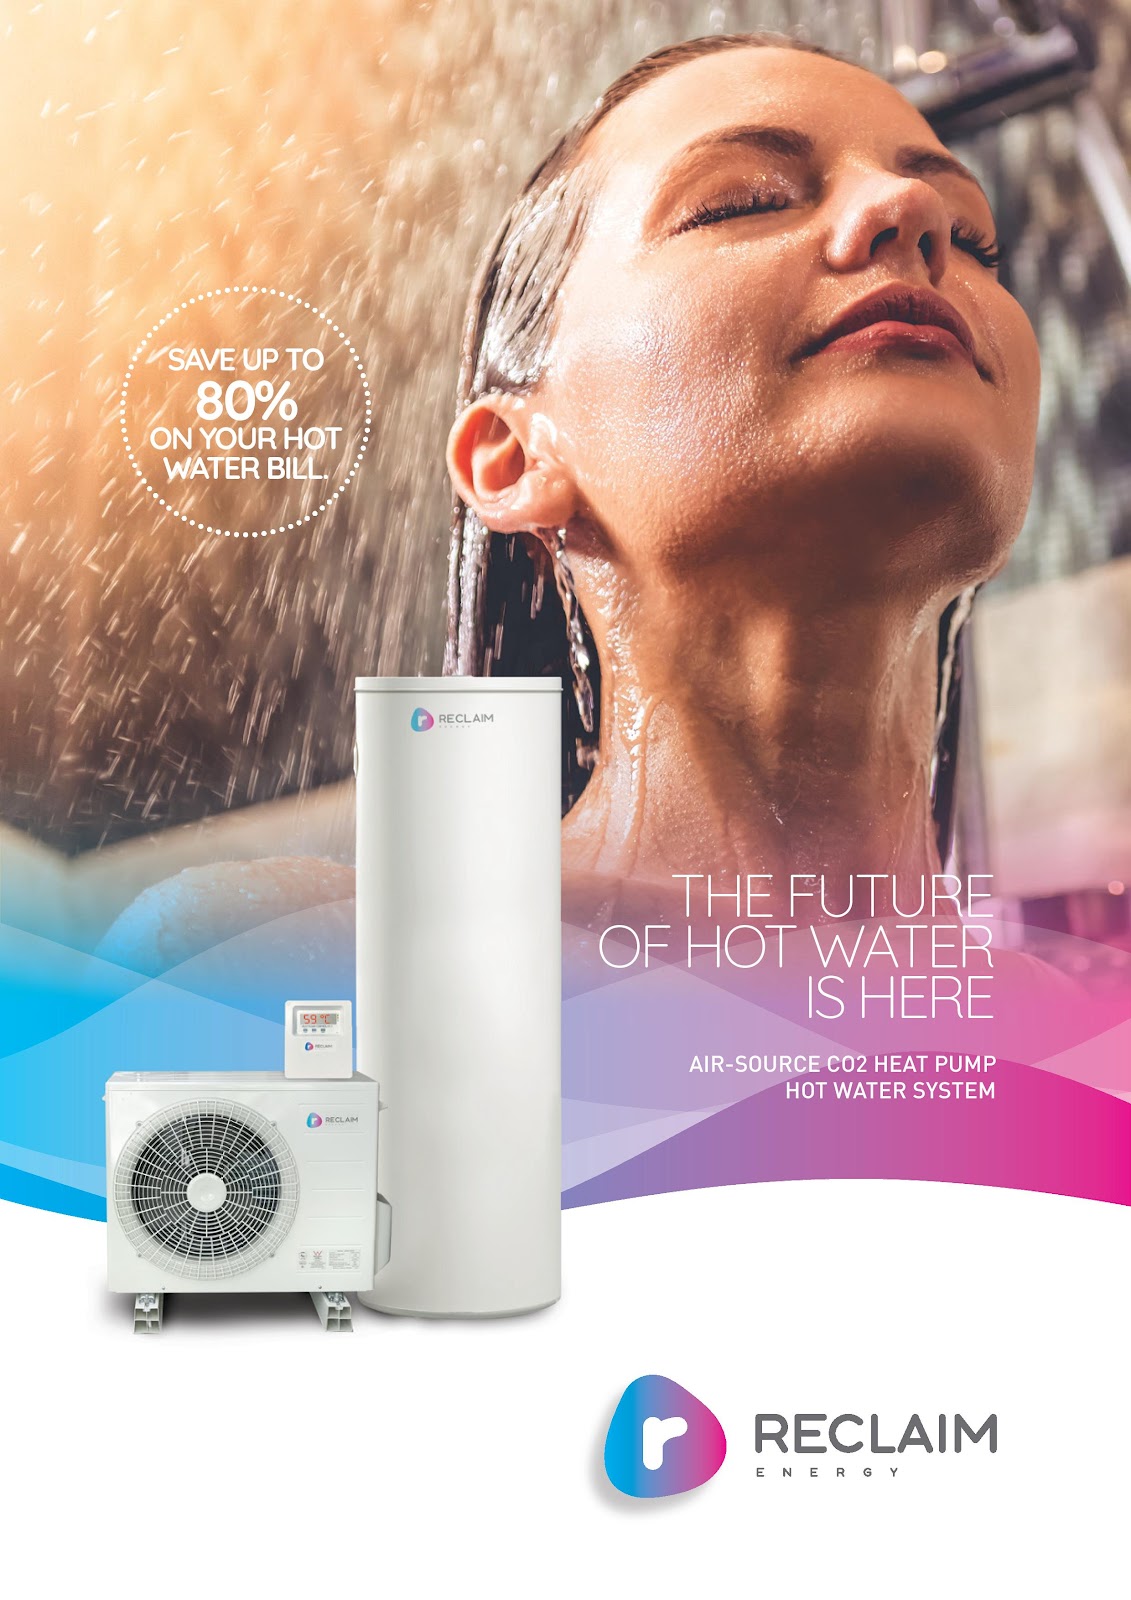 The future of hot water is here with air-source C02 heat pump hot water system